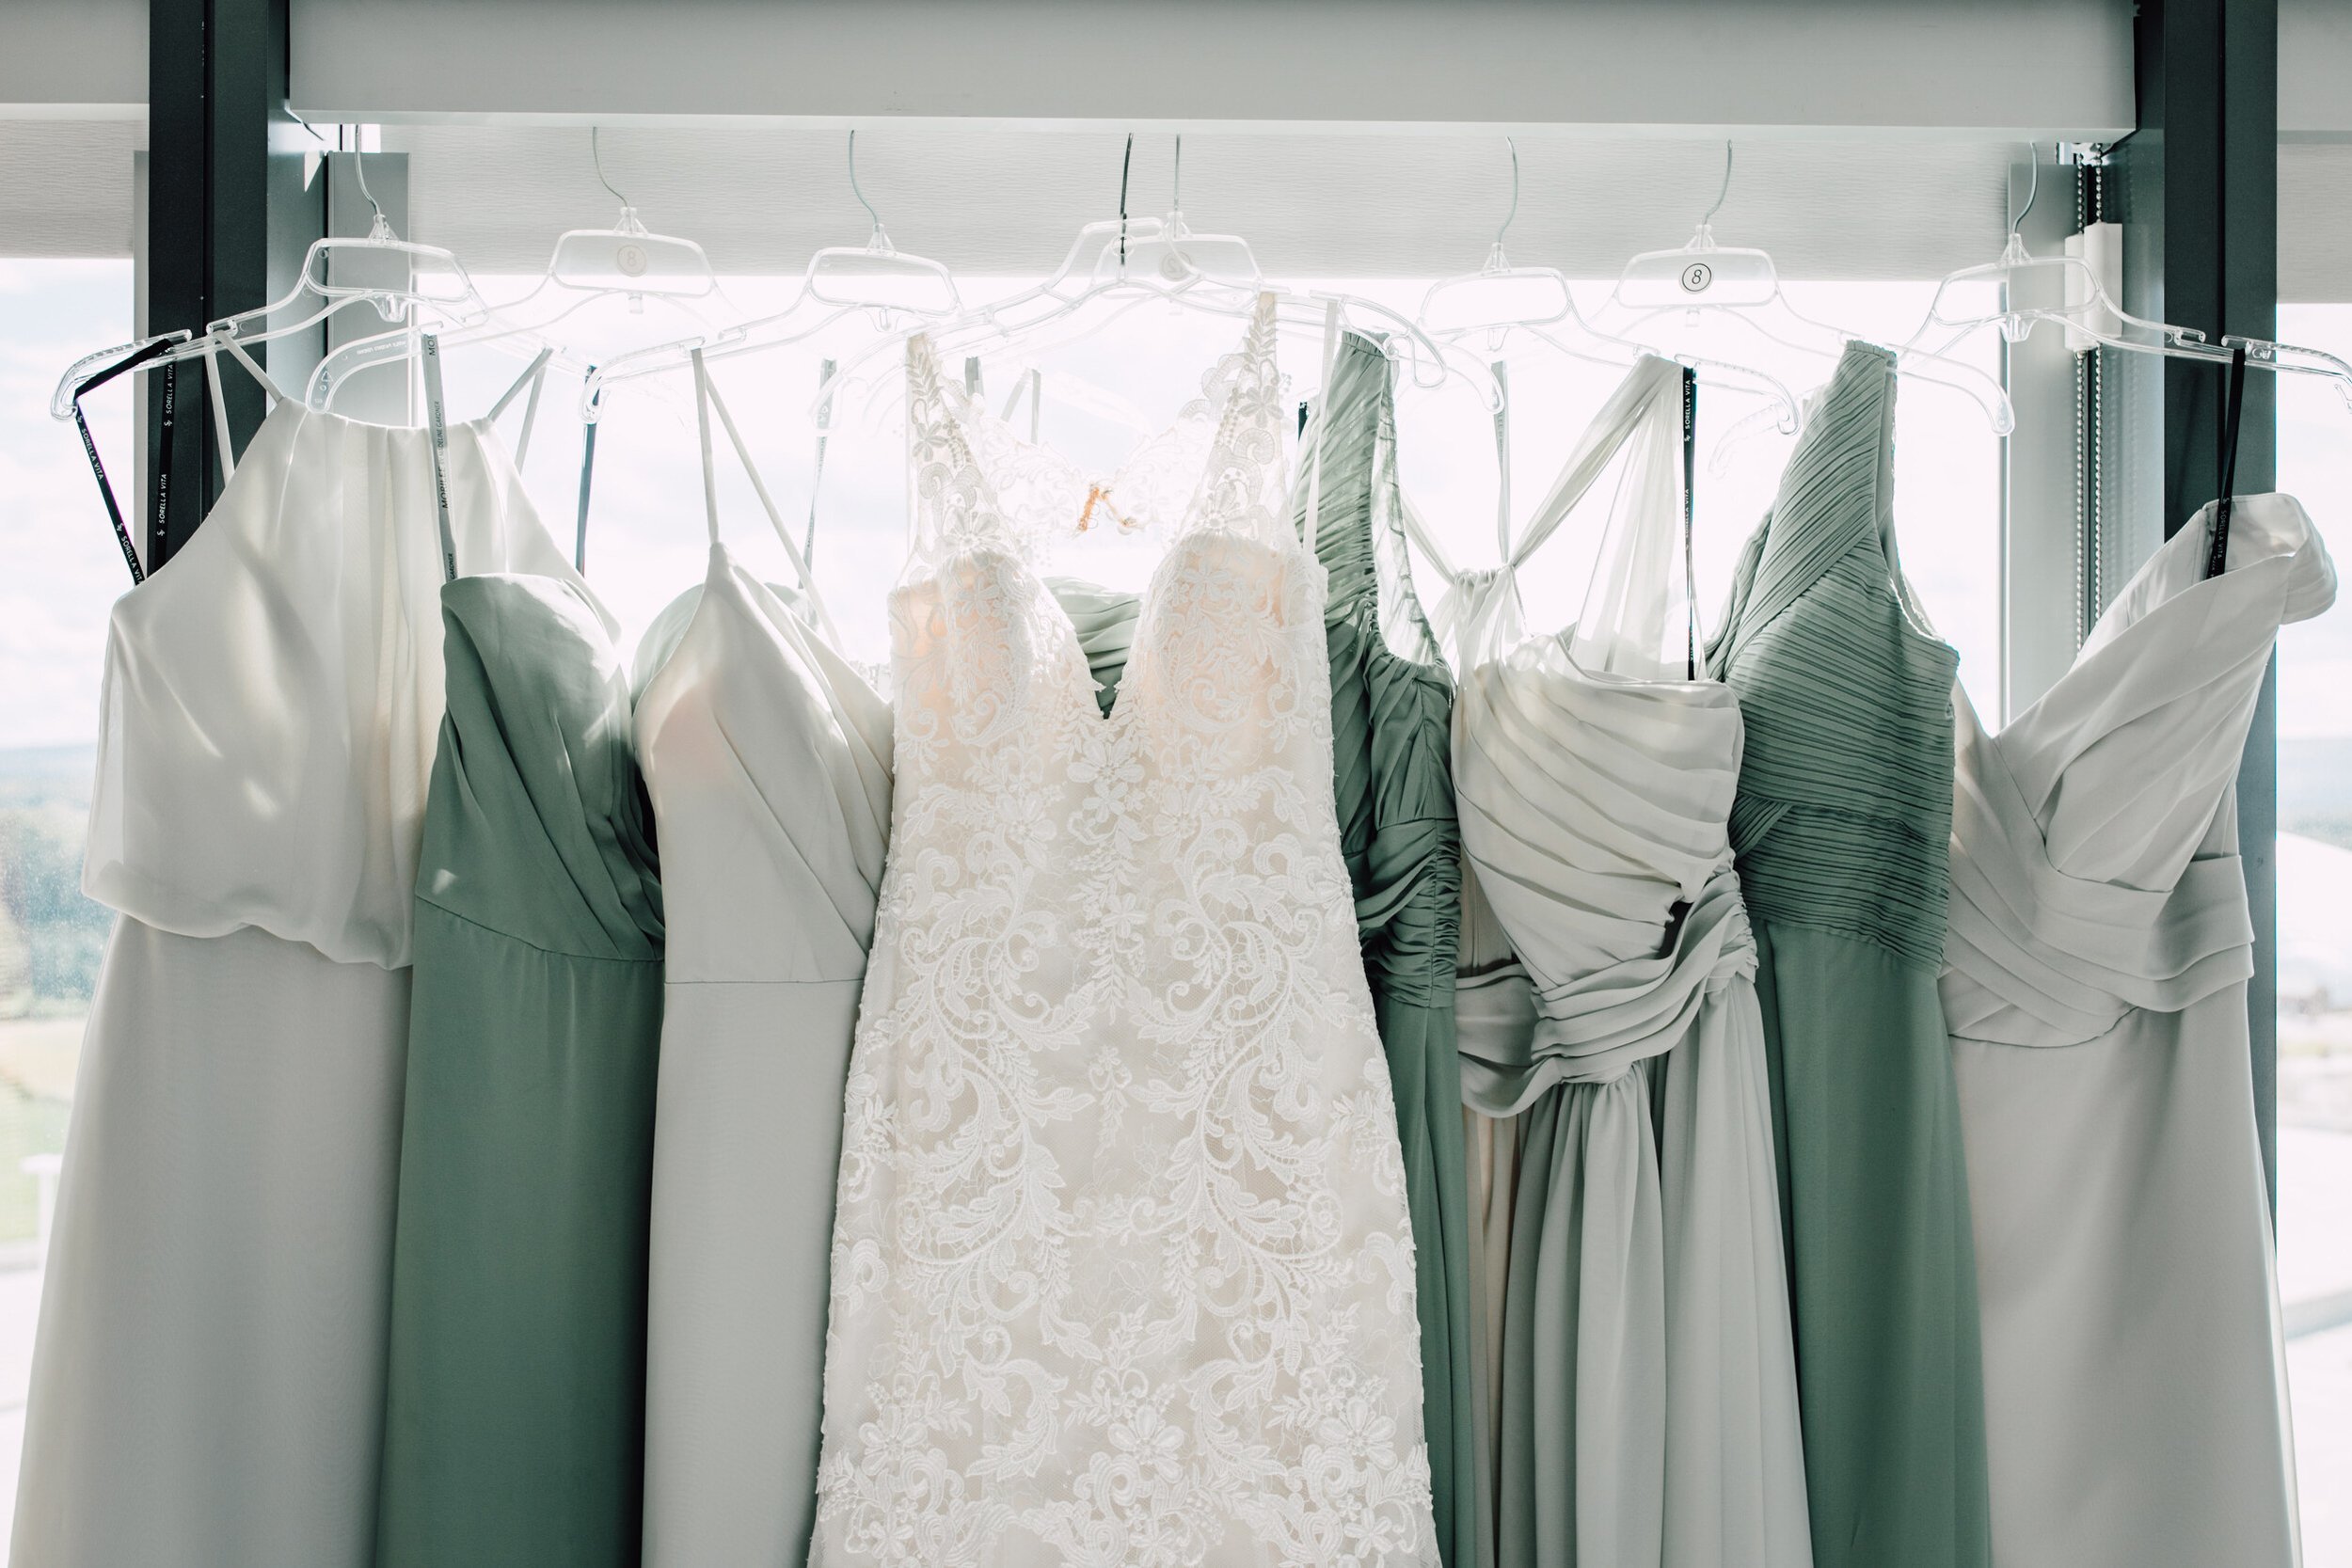  Mint and sage green bridesmaids dresses hang to the sides of a wedding dress 